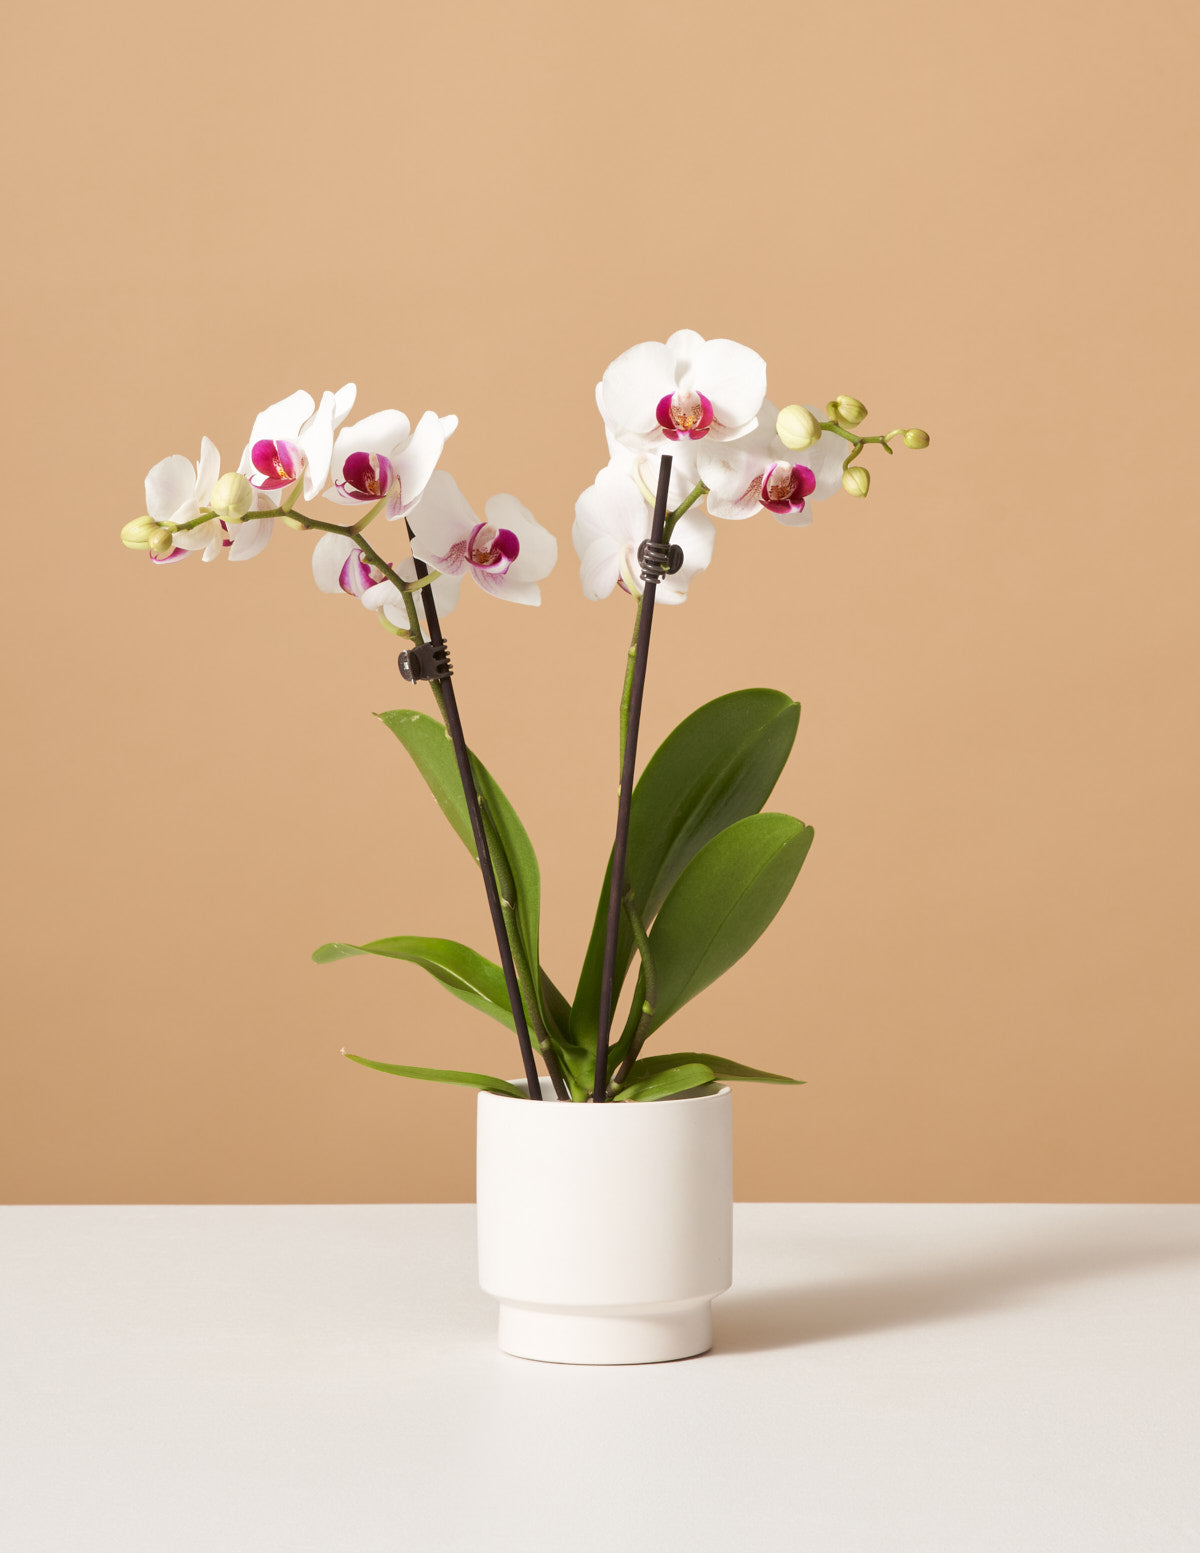 Petite White Orchid Blooming Houseplant | Plants for Delivery ...